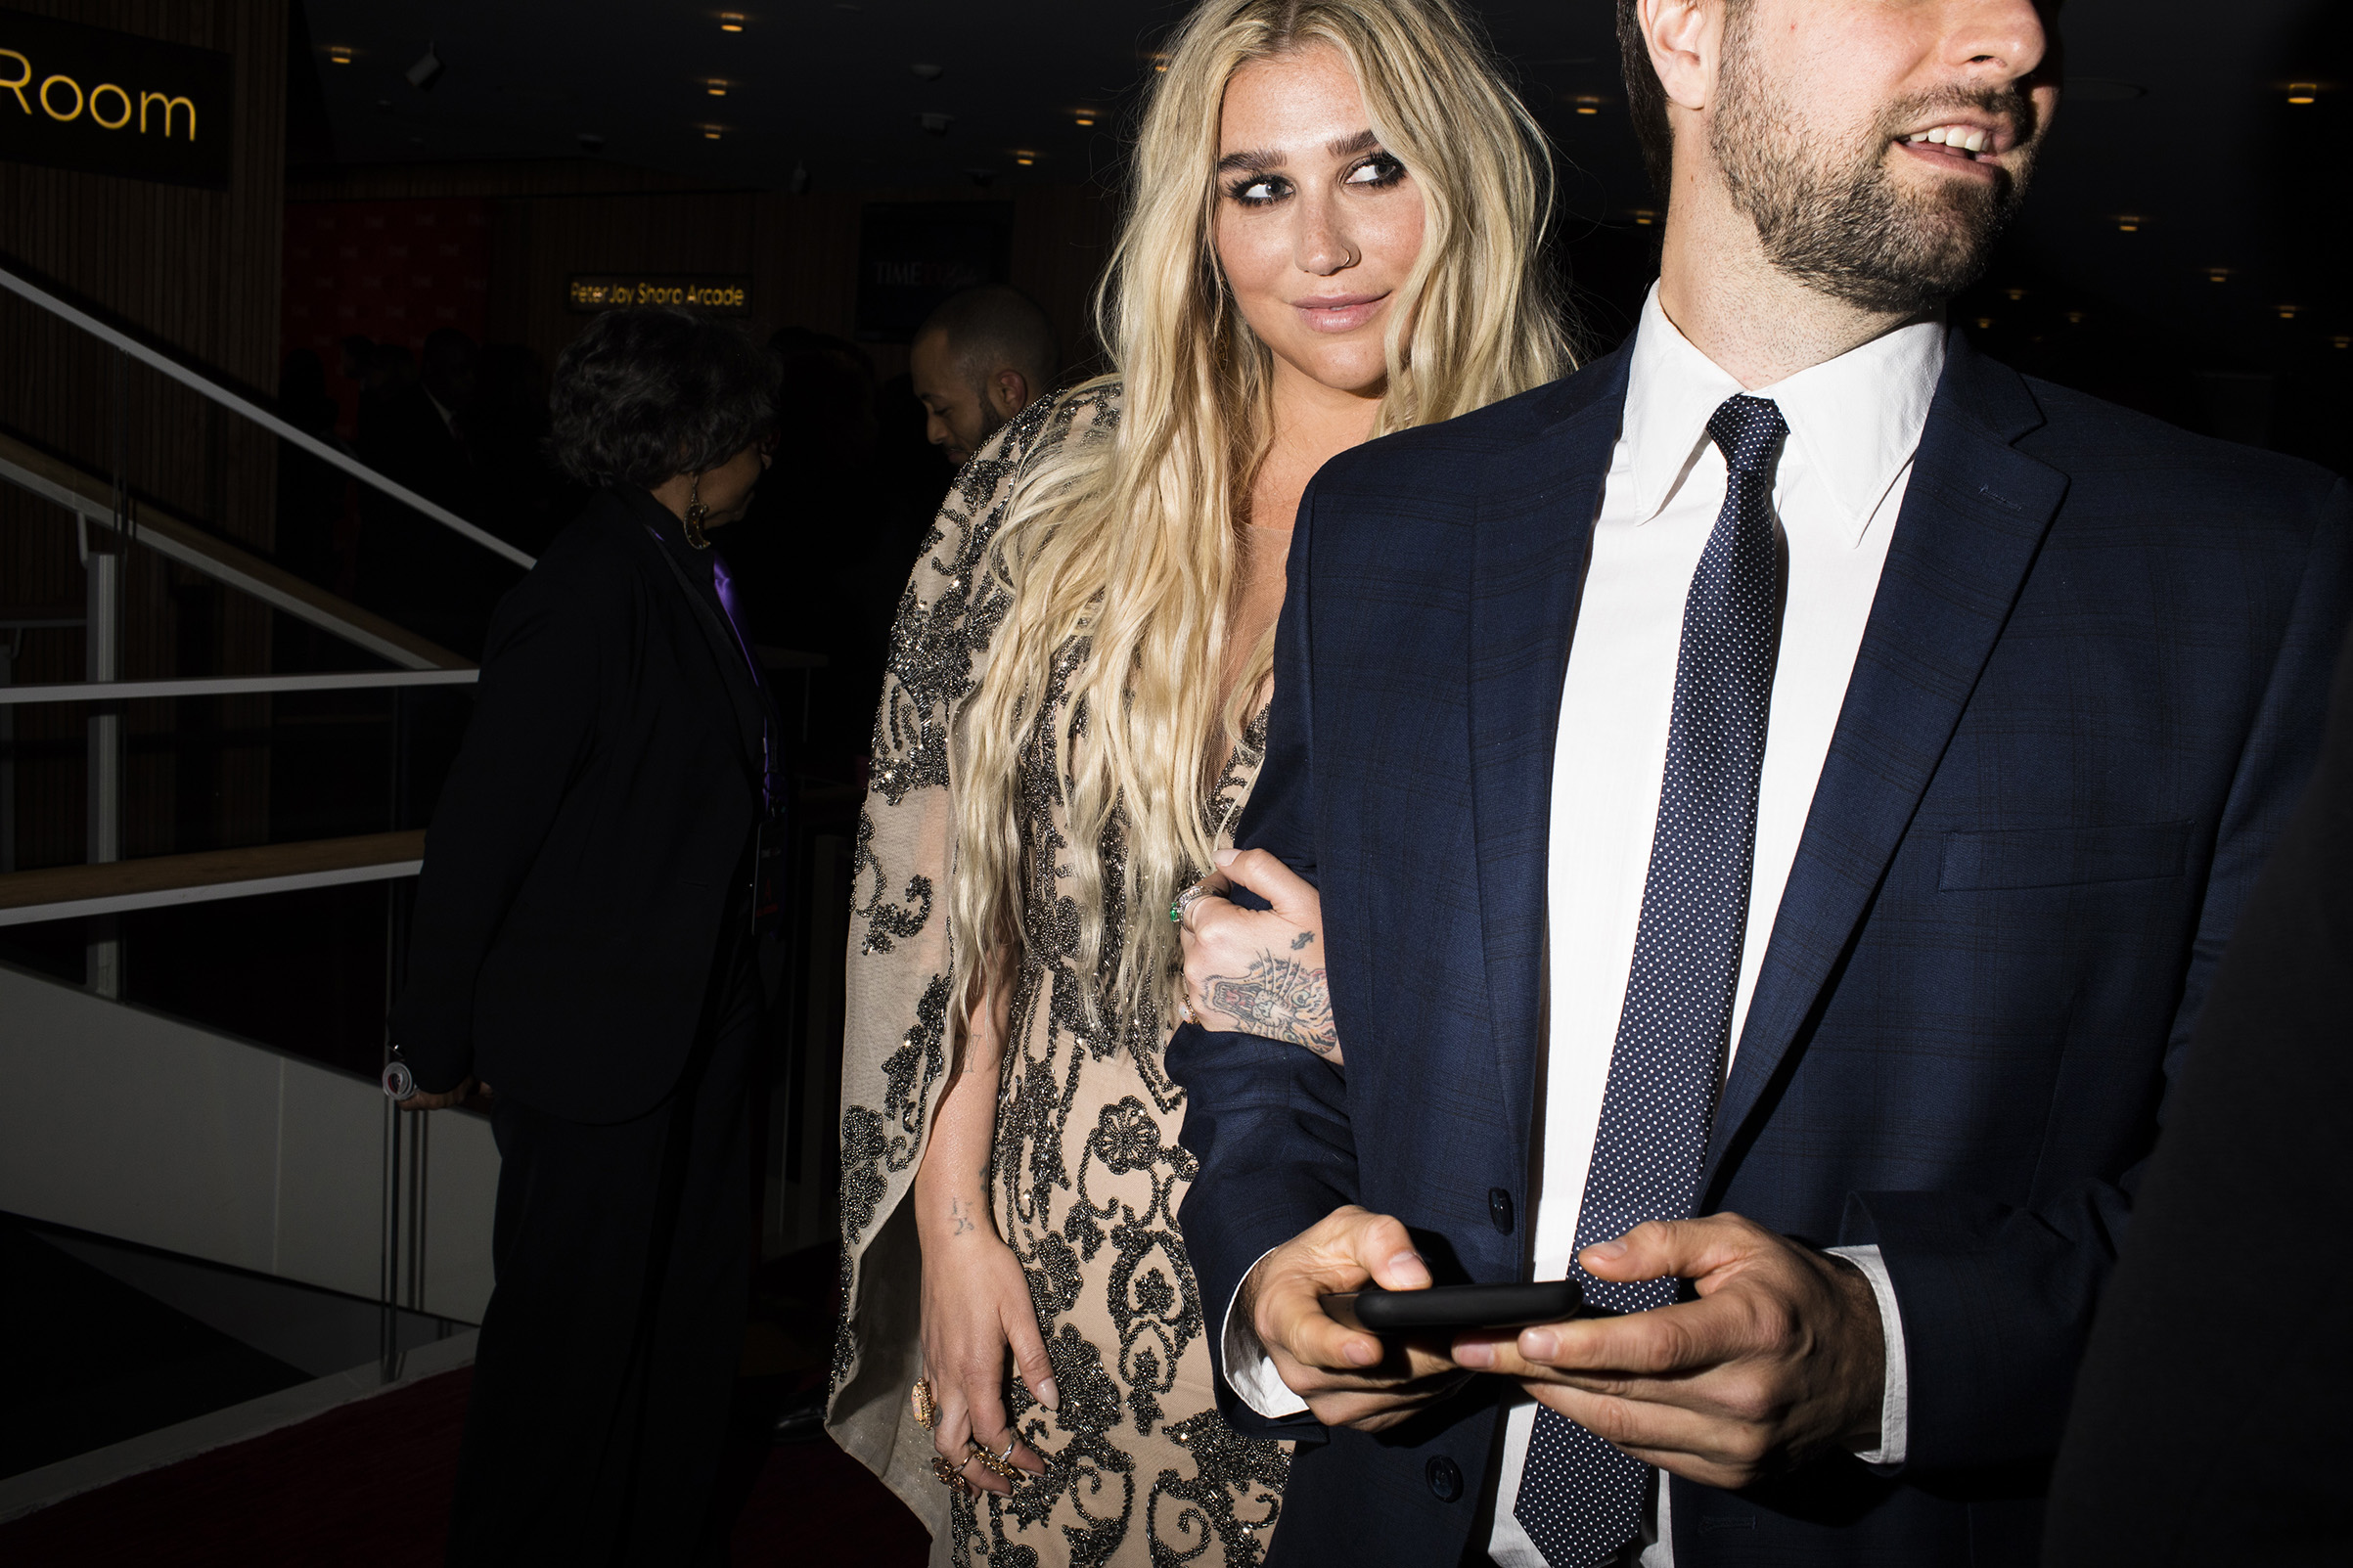 Kesha at the Time 100 Gala at Jazz at Lincoln Center on April 24, 2018 in New York City. (Landon Nordeman for TIME)